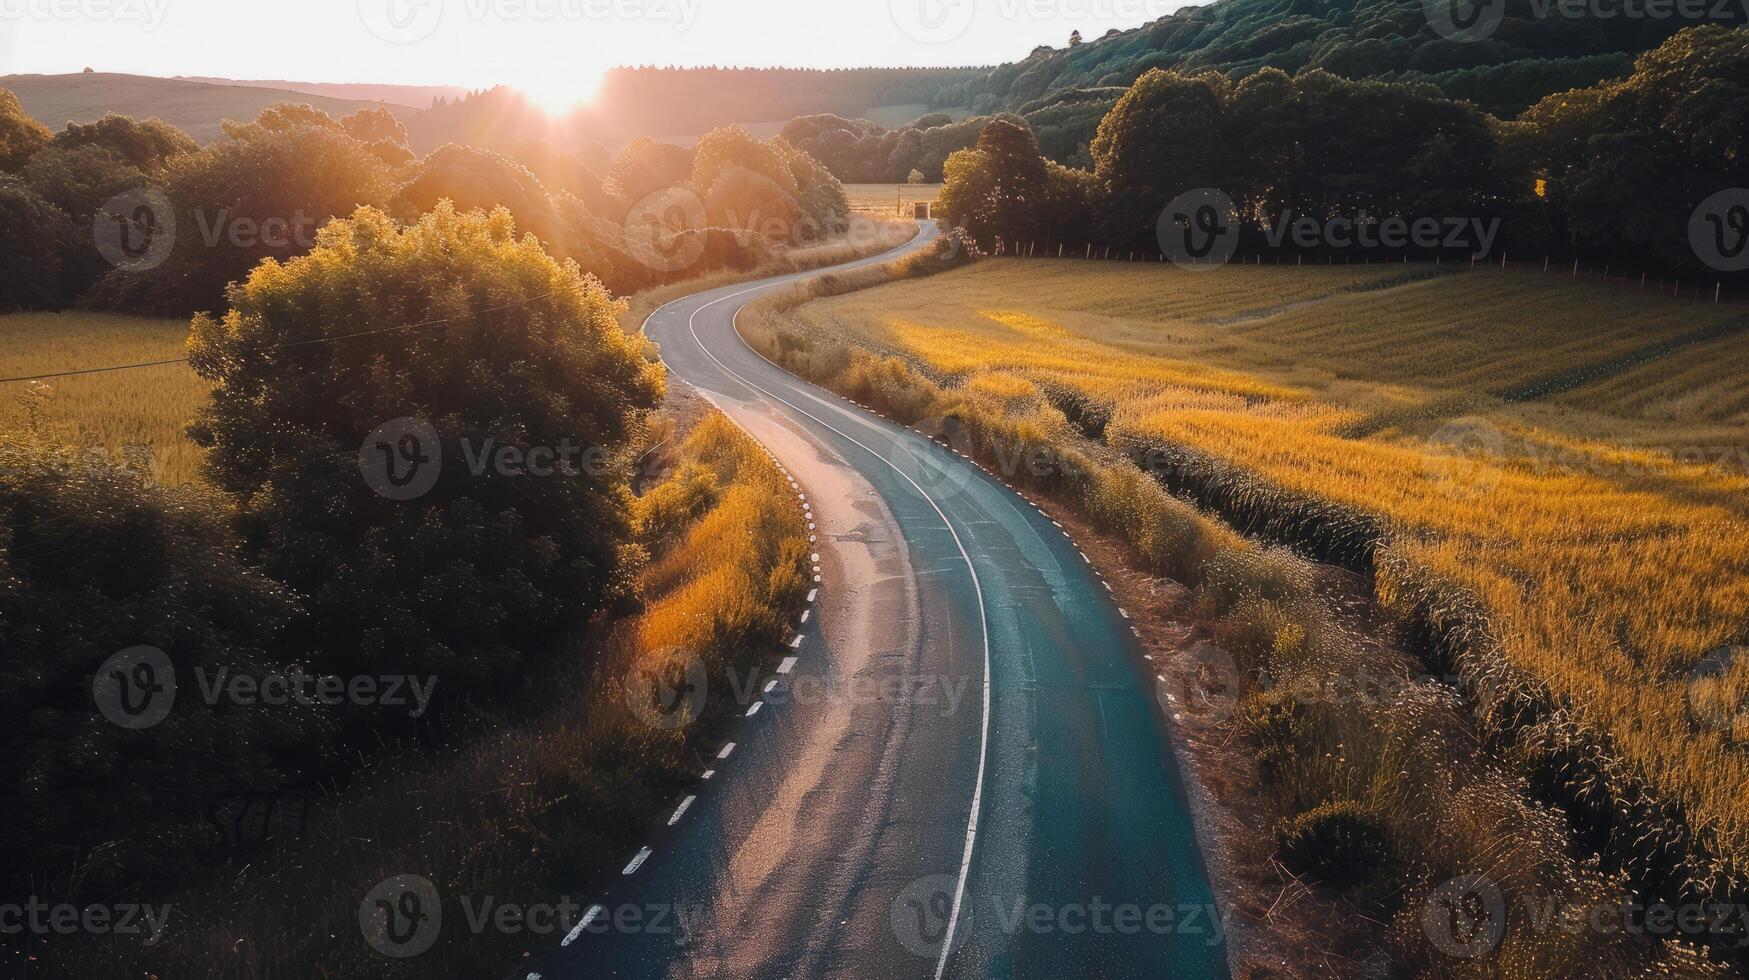 Road trip through country roads, surrounded by fields of sun-kissed crops in the height of summer photo